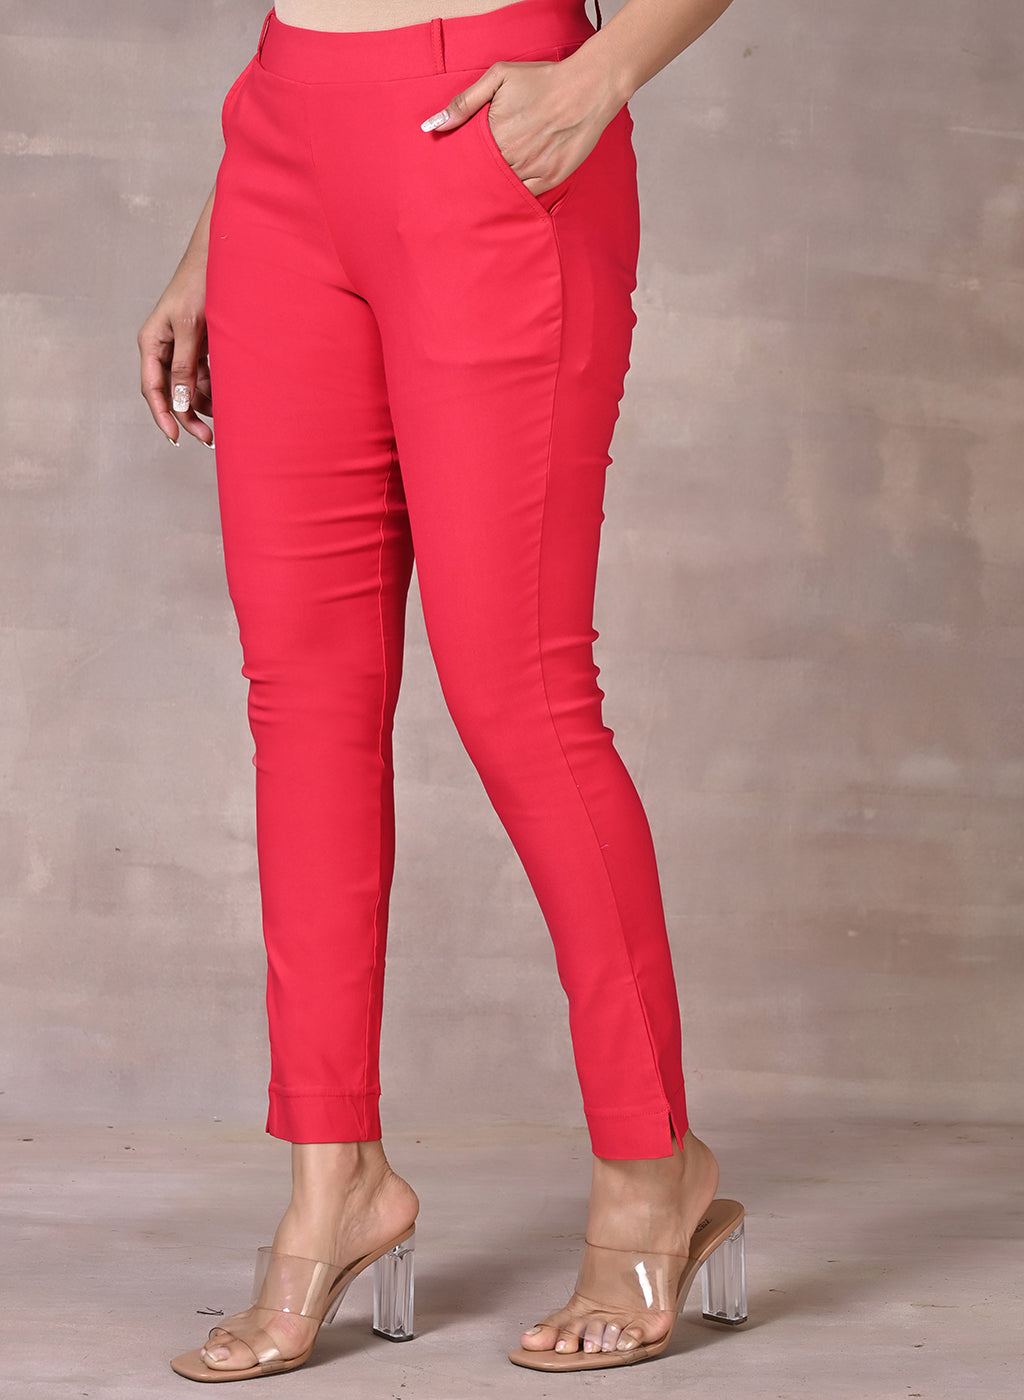 Skin-Fit Red Jeggings